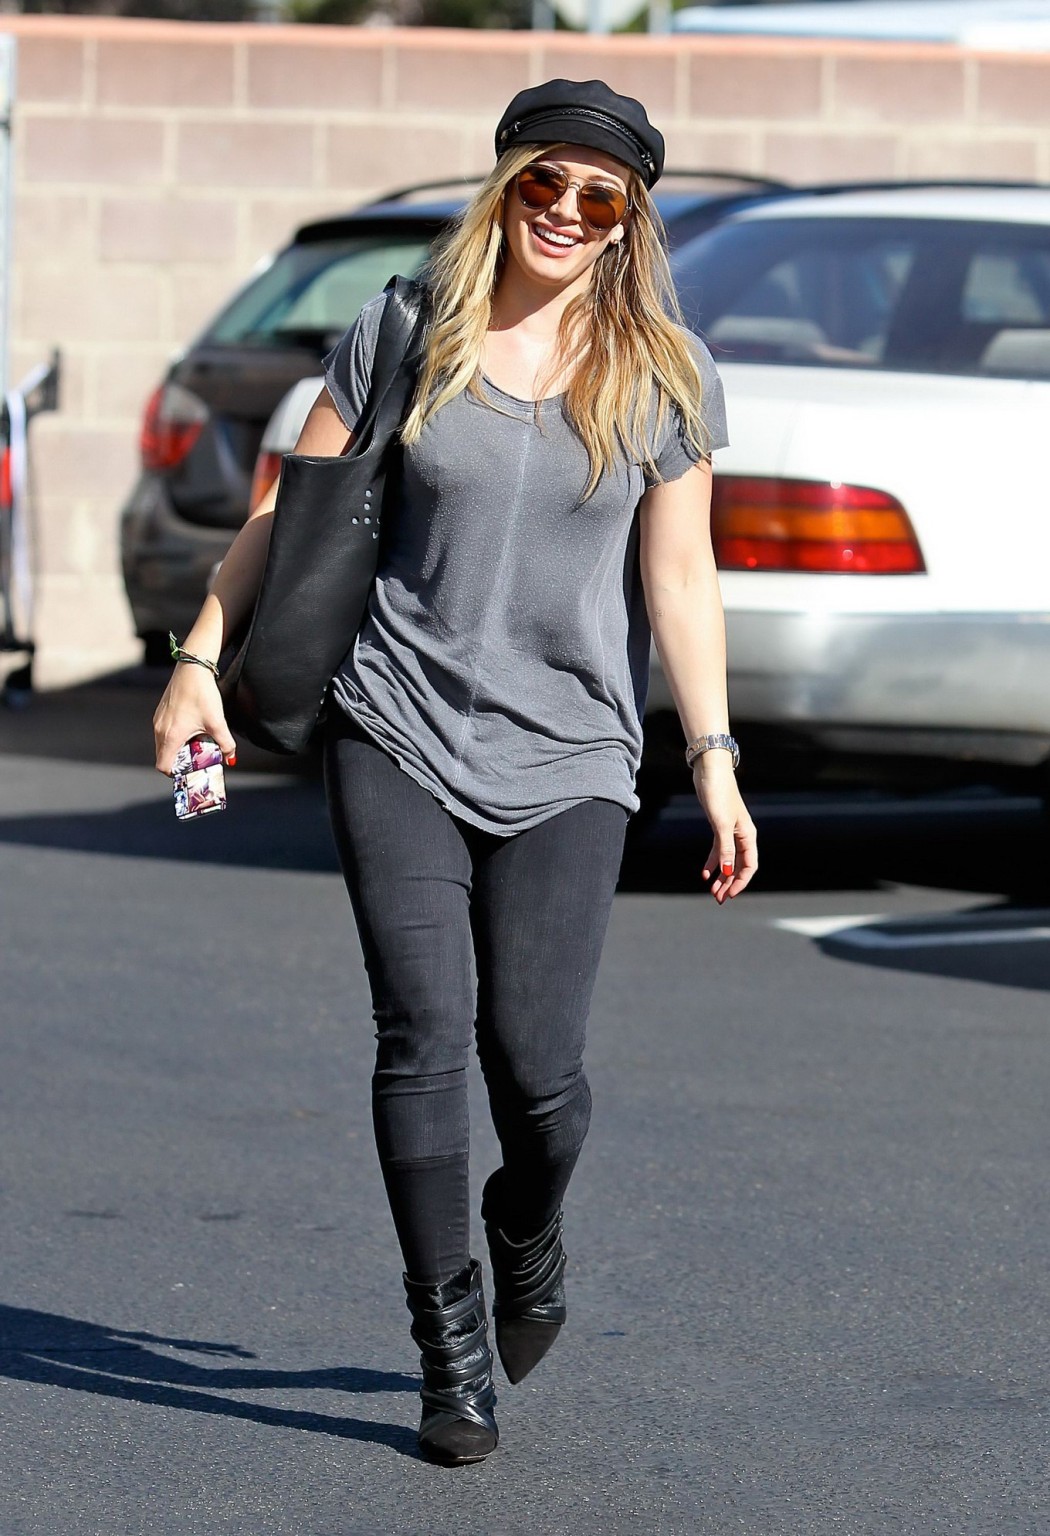 Hilary Duff Showing Hard Pokies In A Gray Top And Tight Jeans Out In Santa Monic